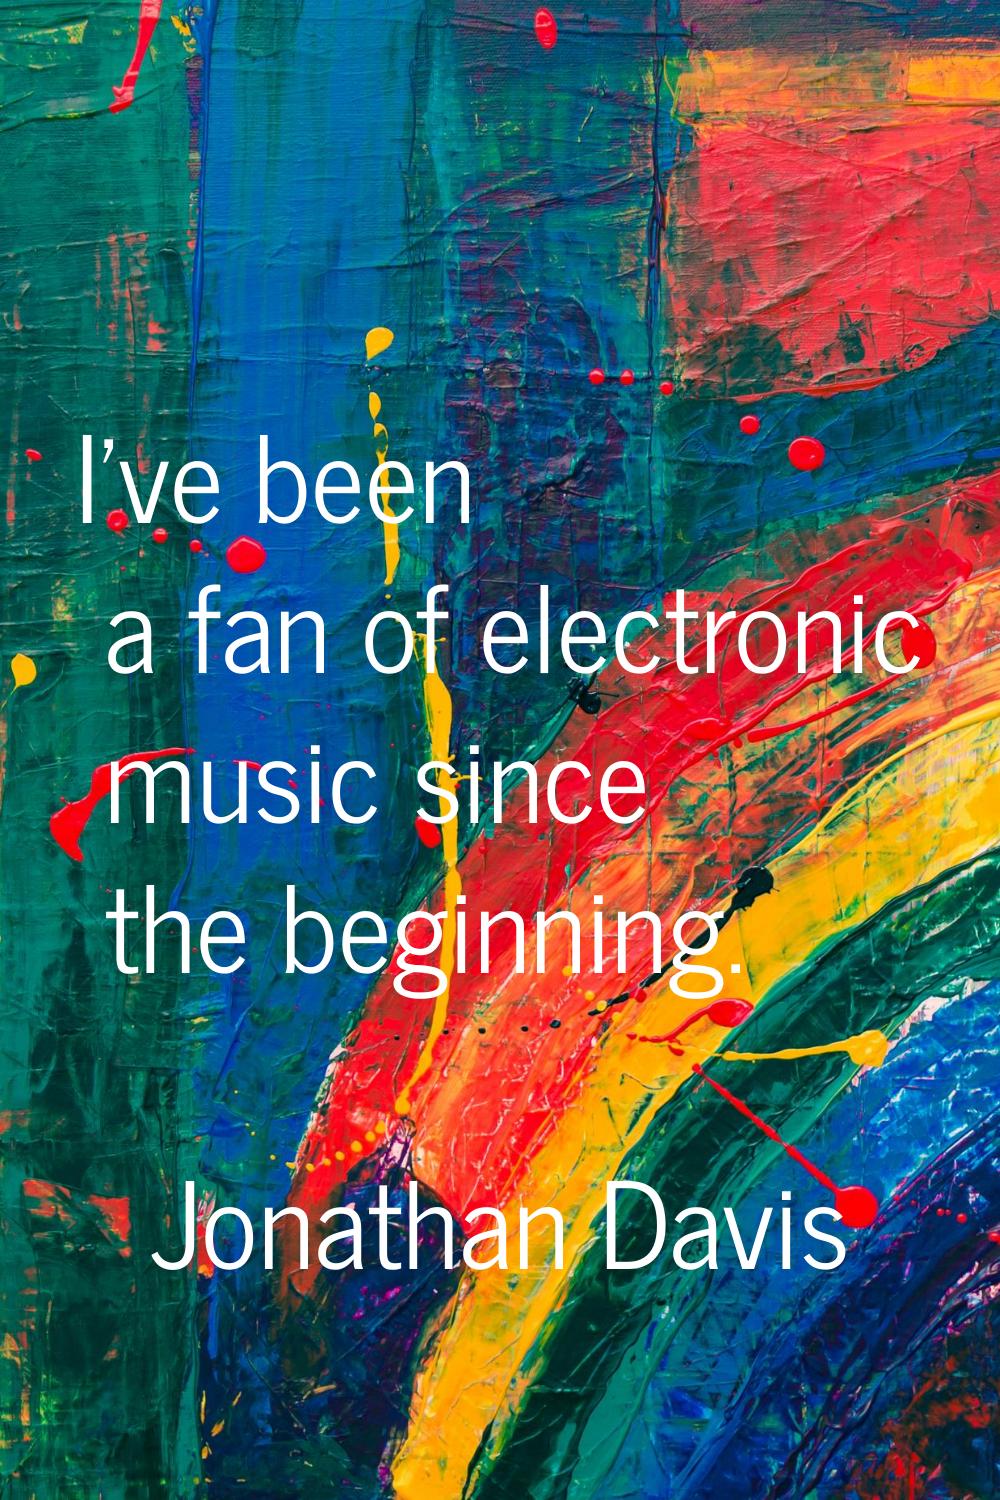 I've been a fan of electronic music since the beginning.